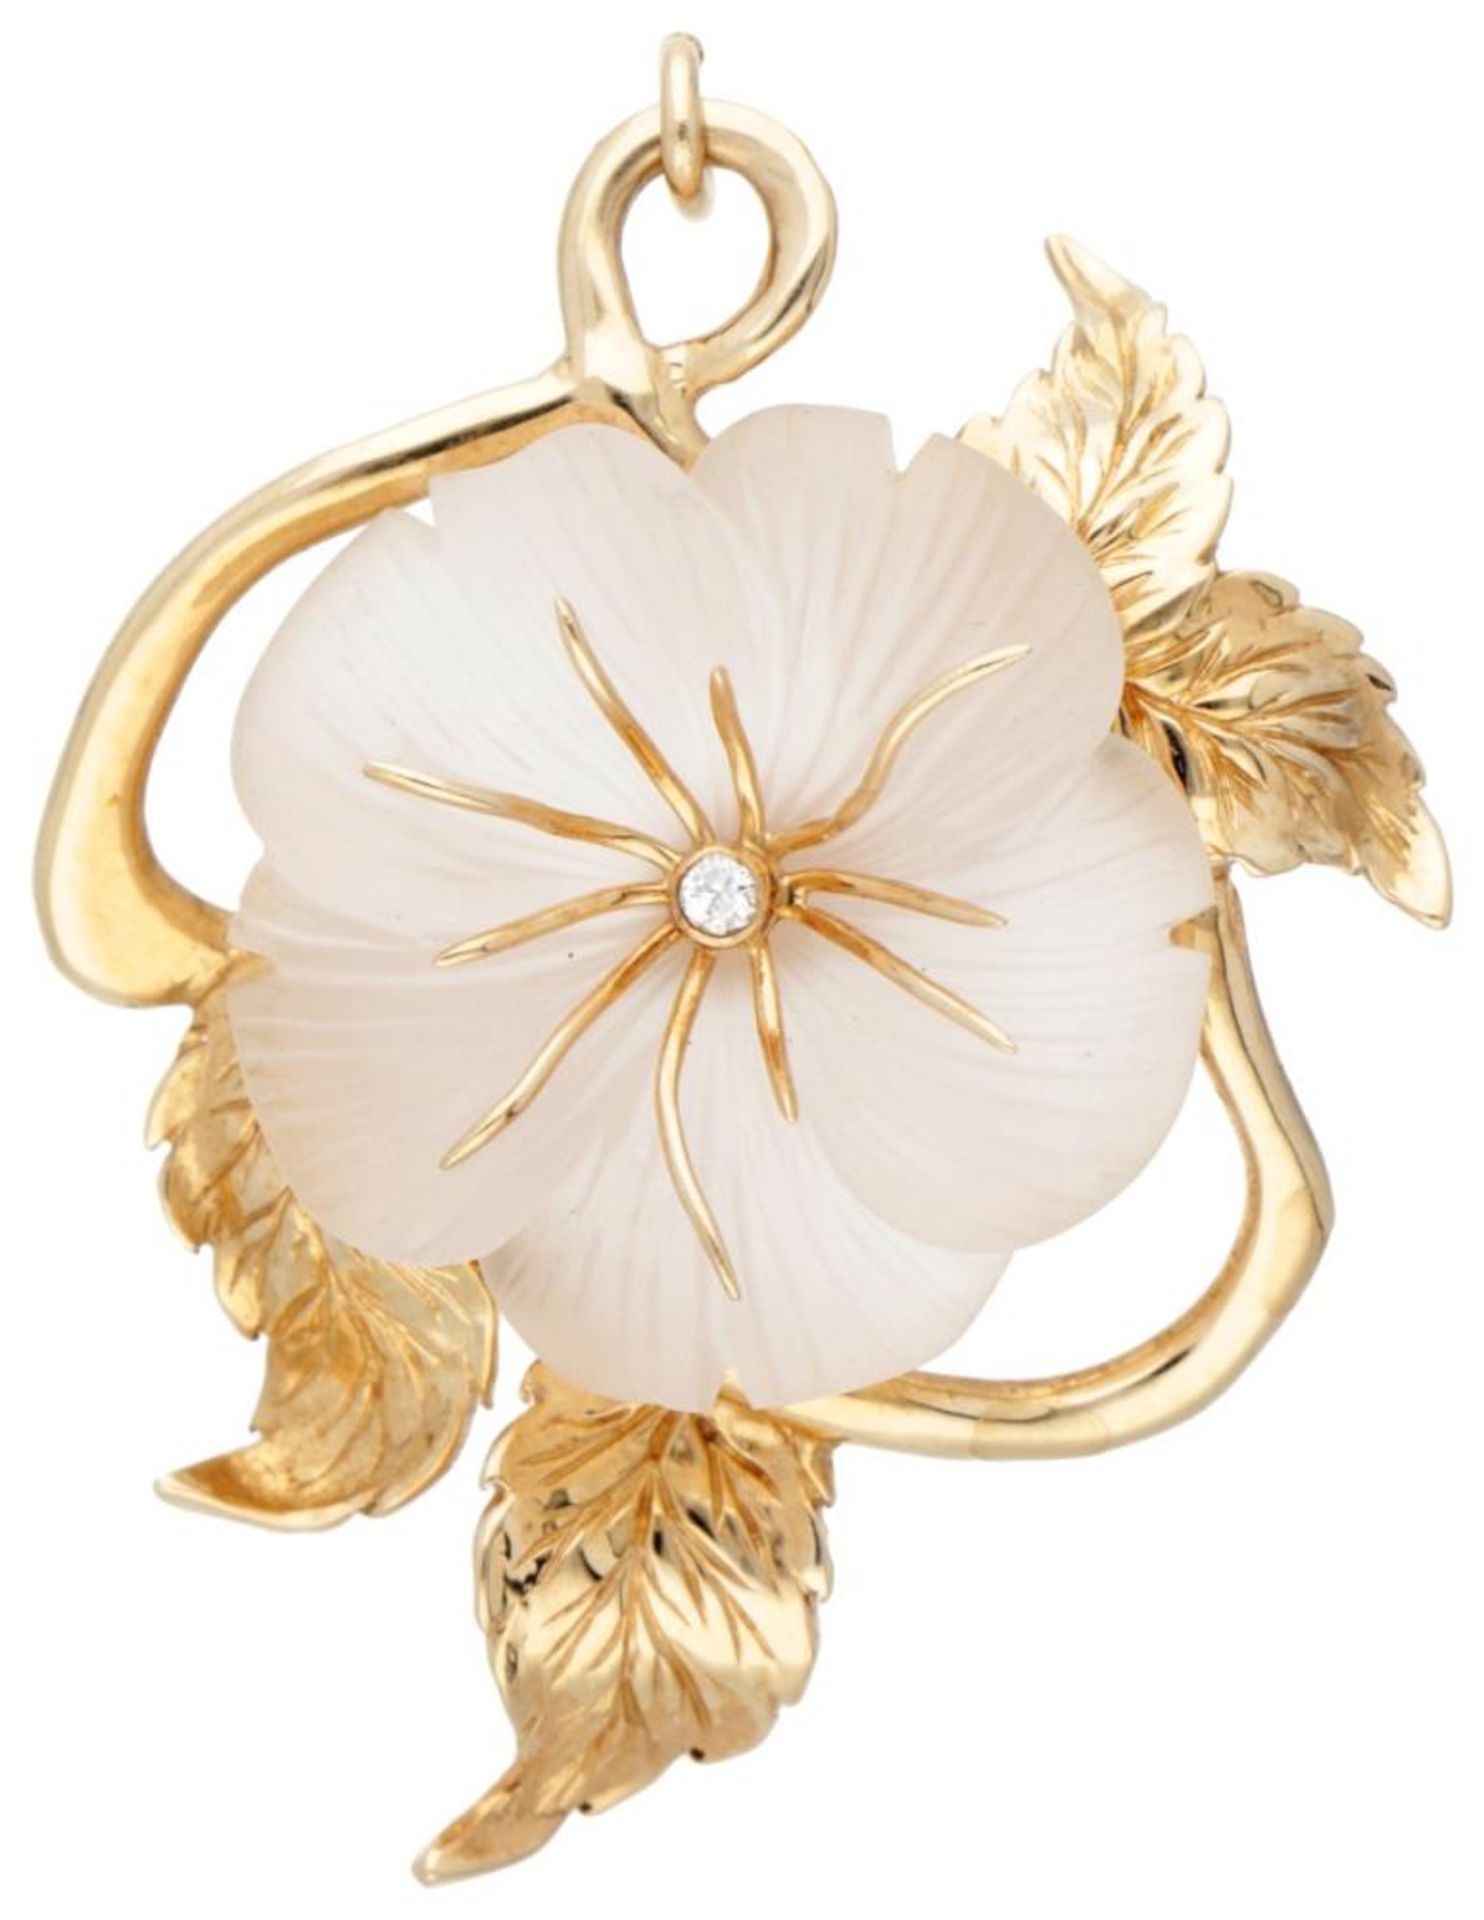 Franklin Mint 14K. yellow gold pendant set with a flower made of quartz and a diamond.